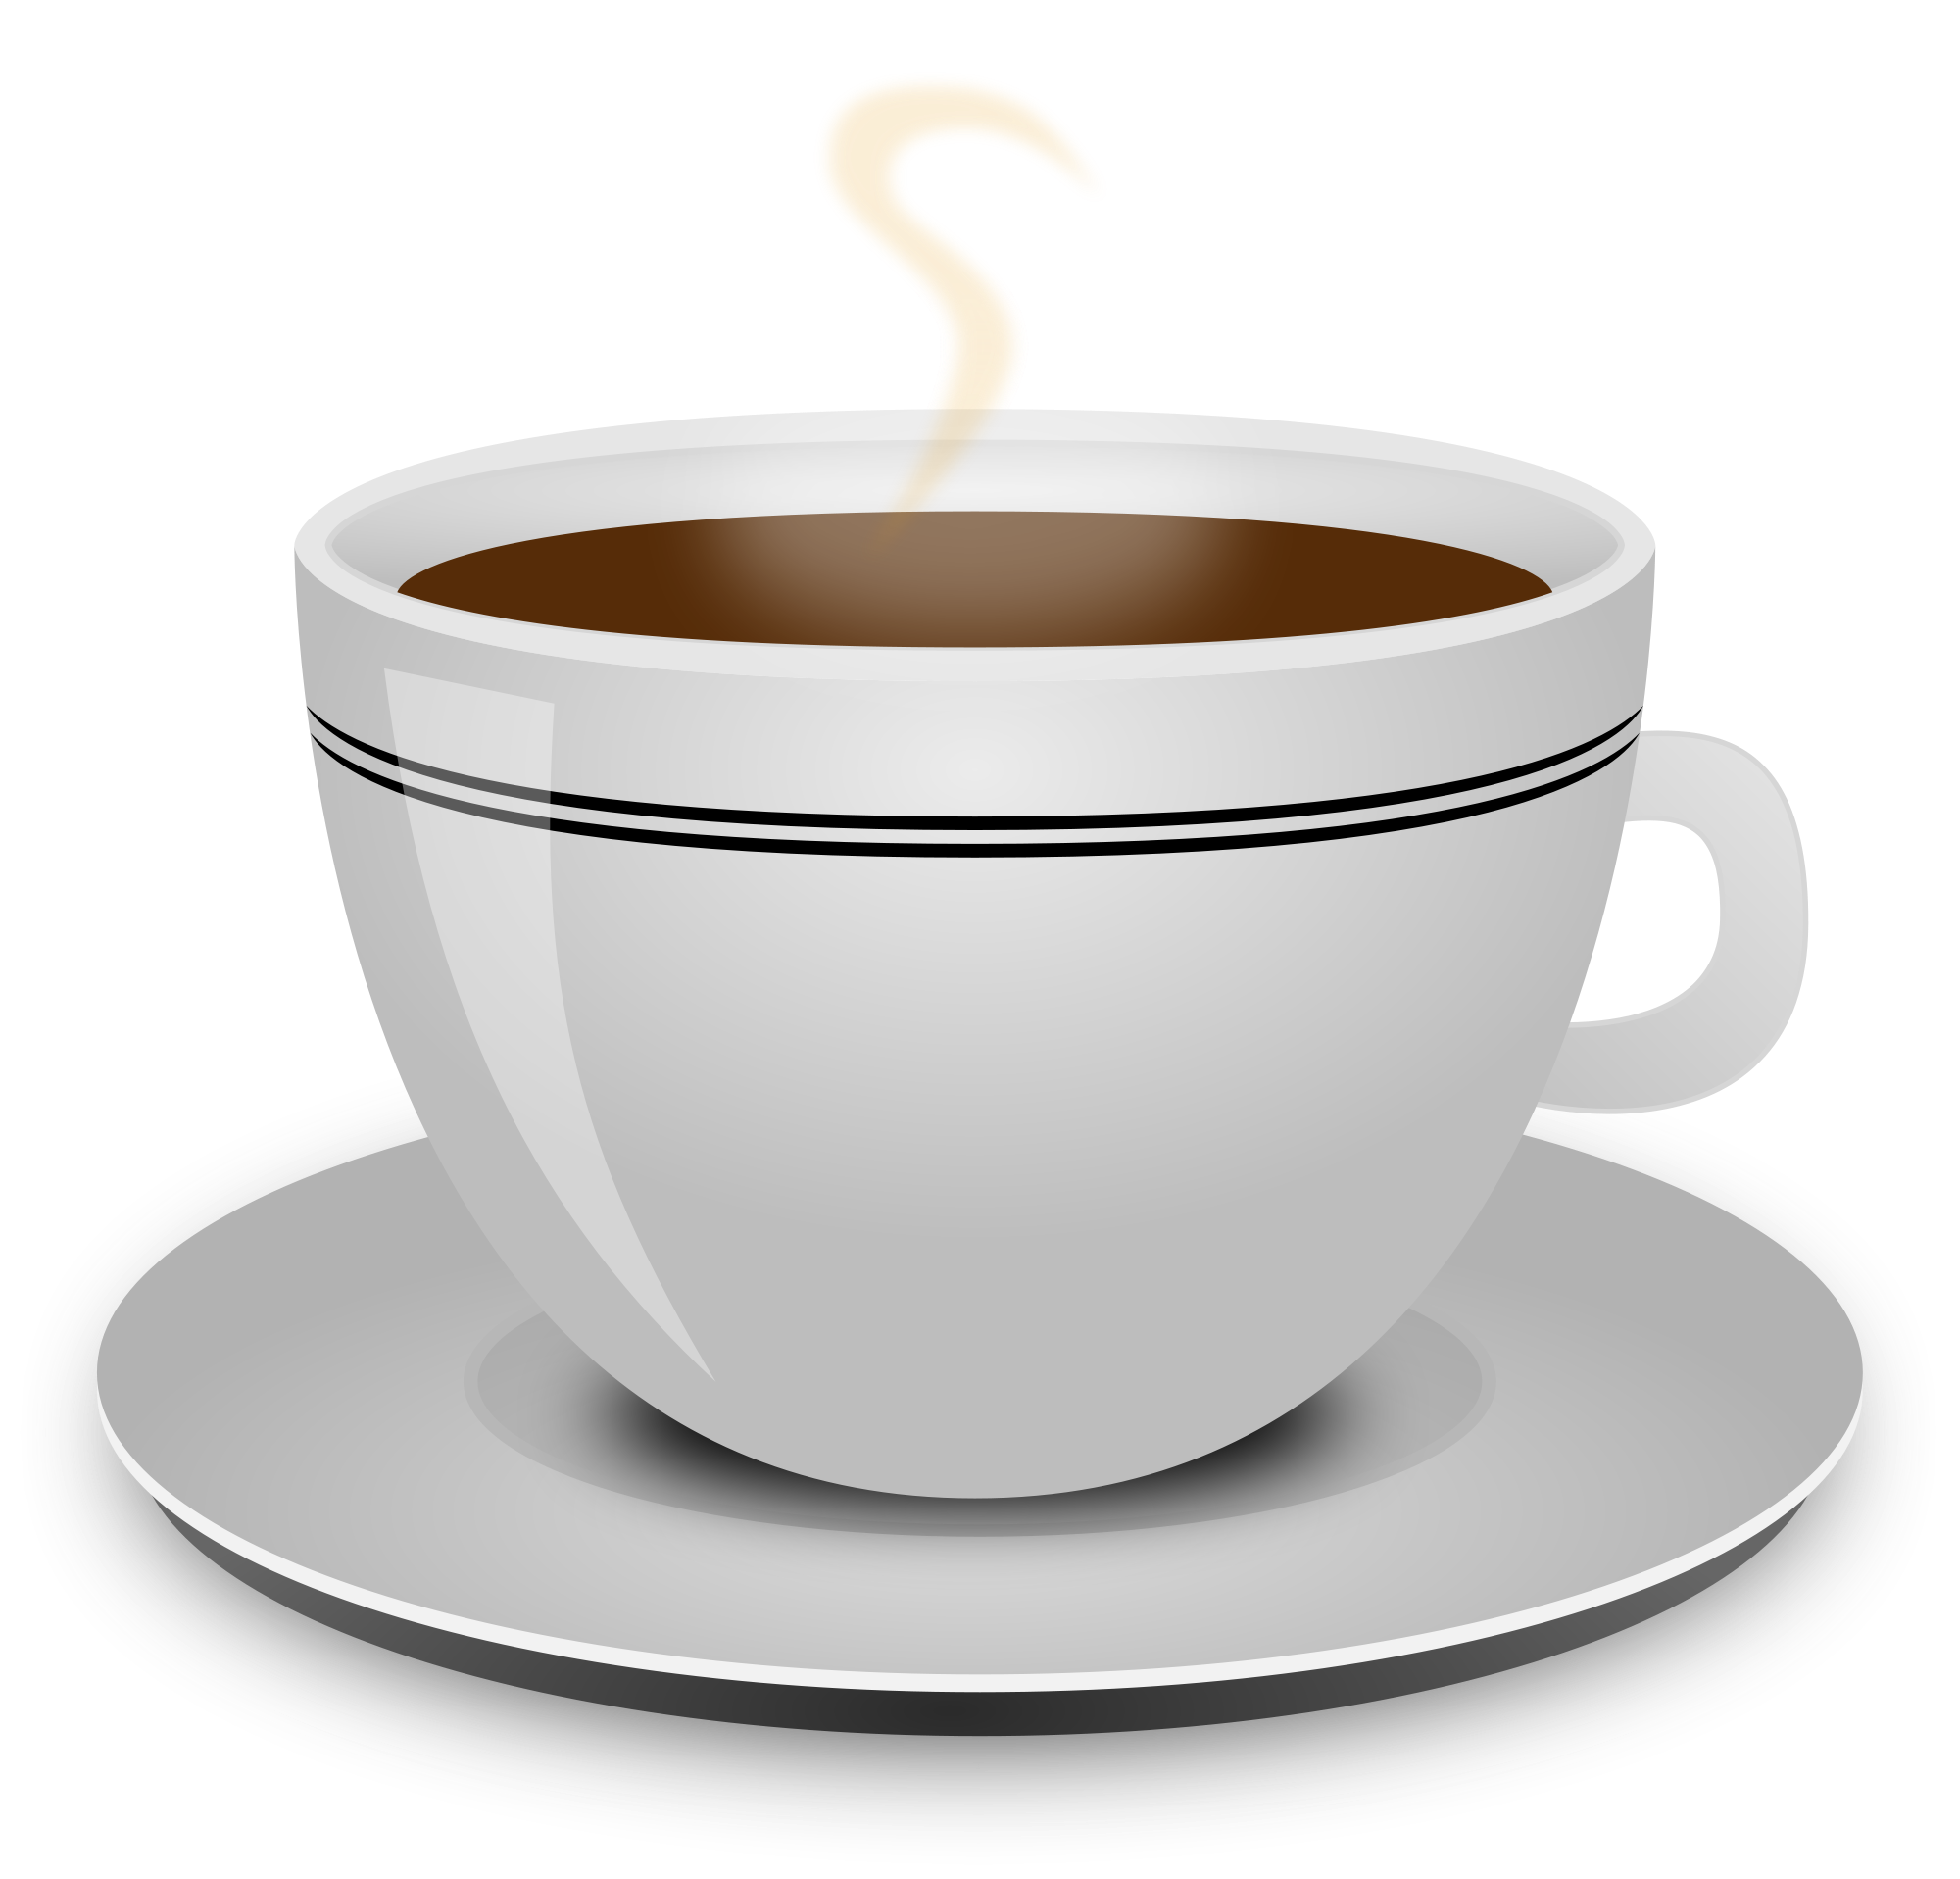 File:Coffee cup icon.svg - Wikimedia Commons